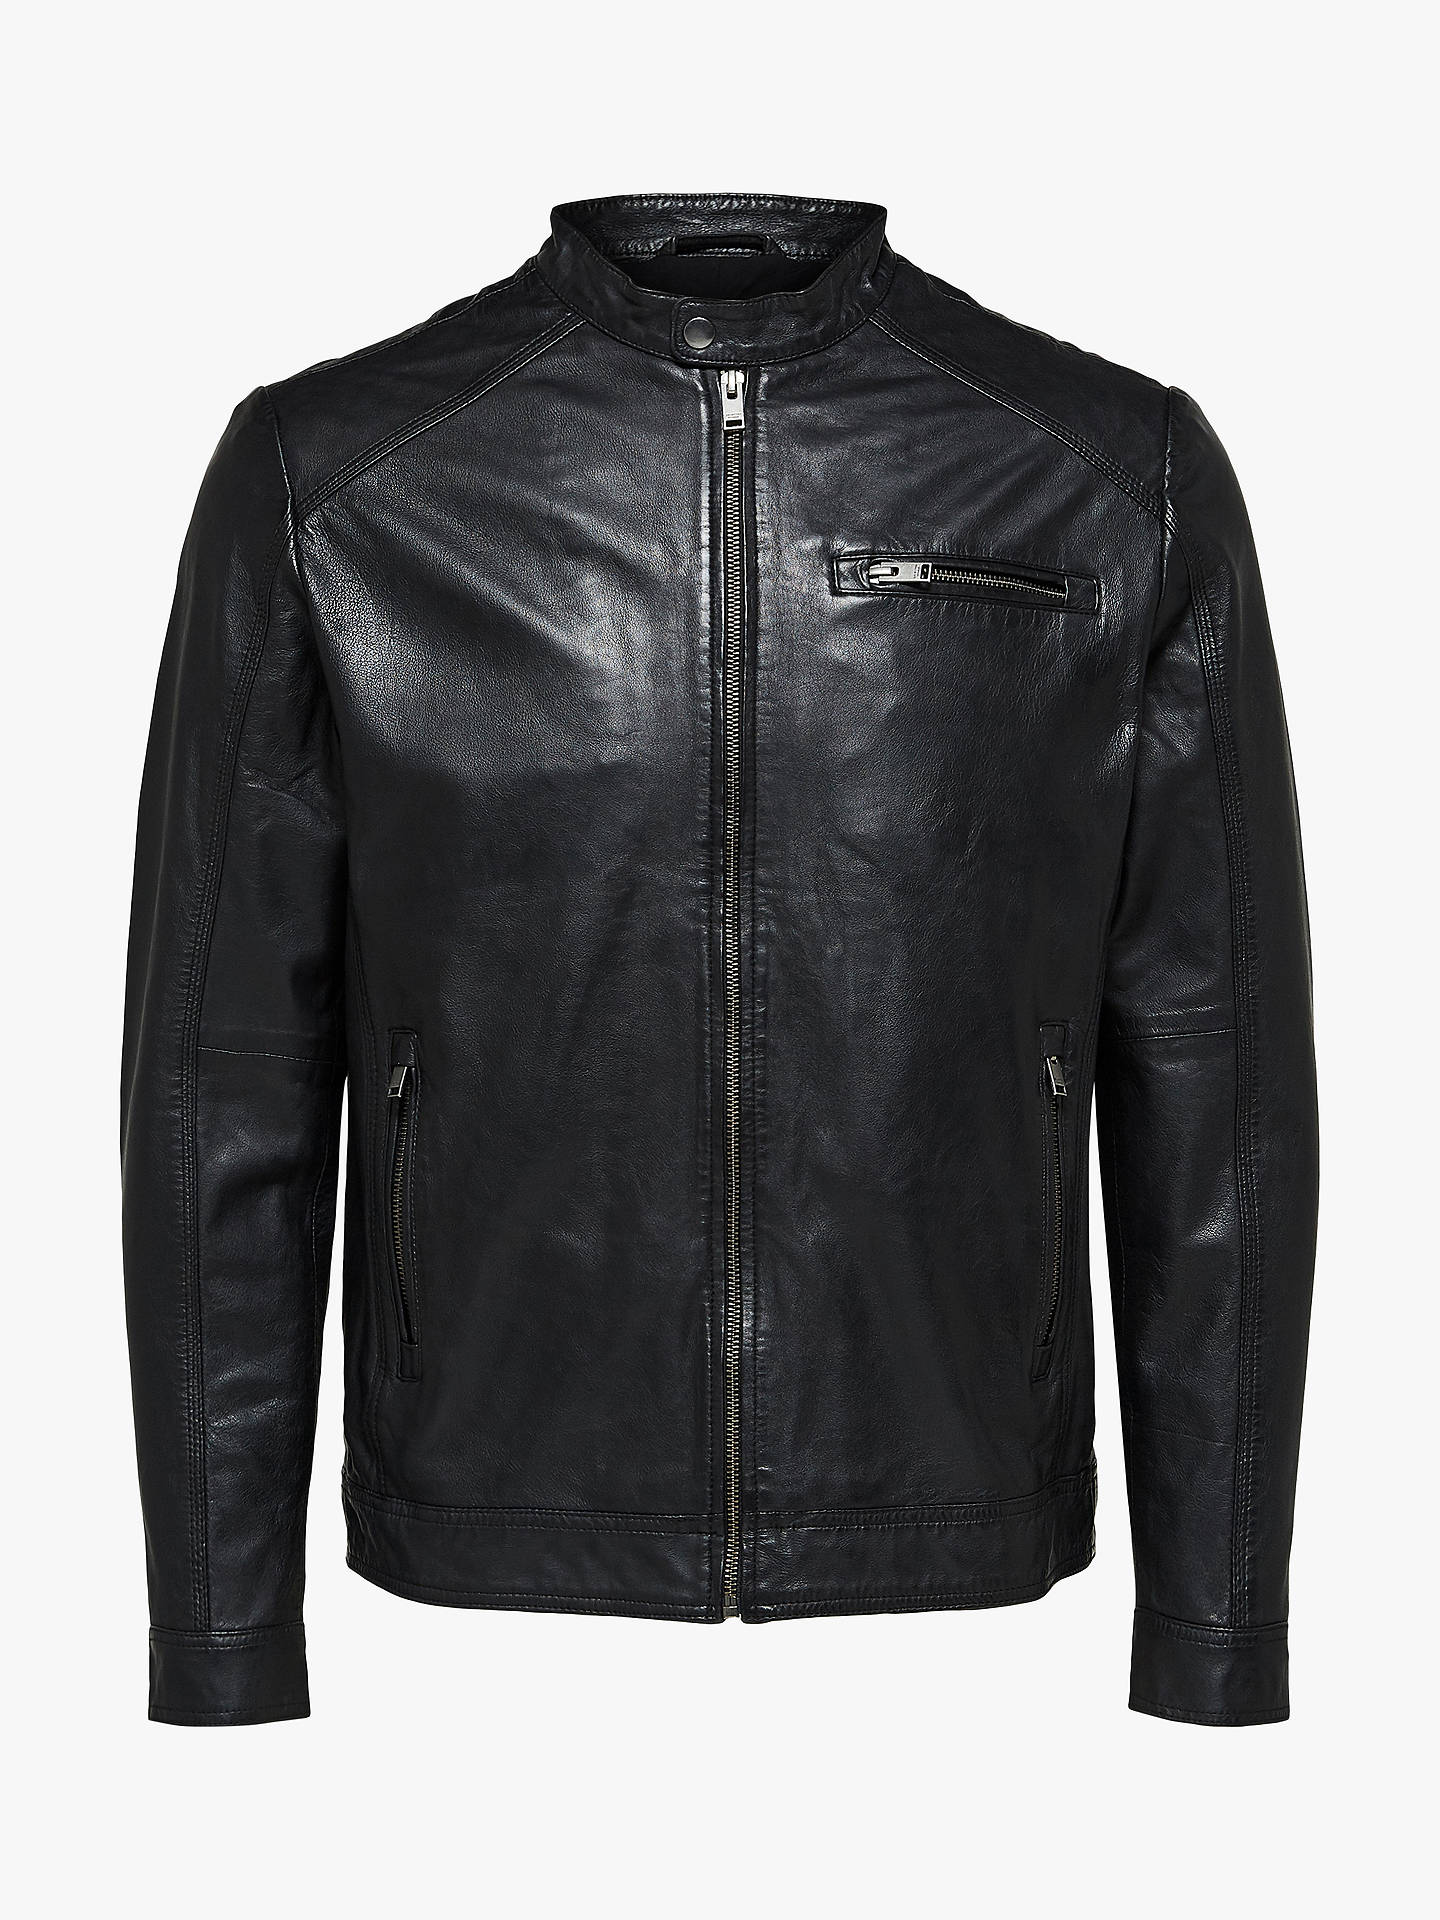 SELECTED HOMME Classic Leather Jacket, Black at John Lewis & Partners